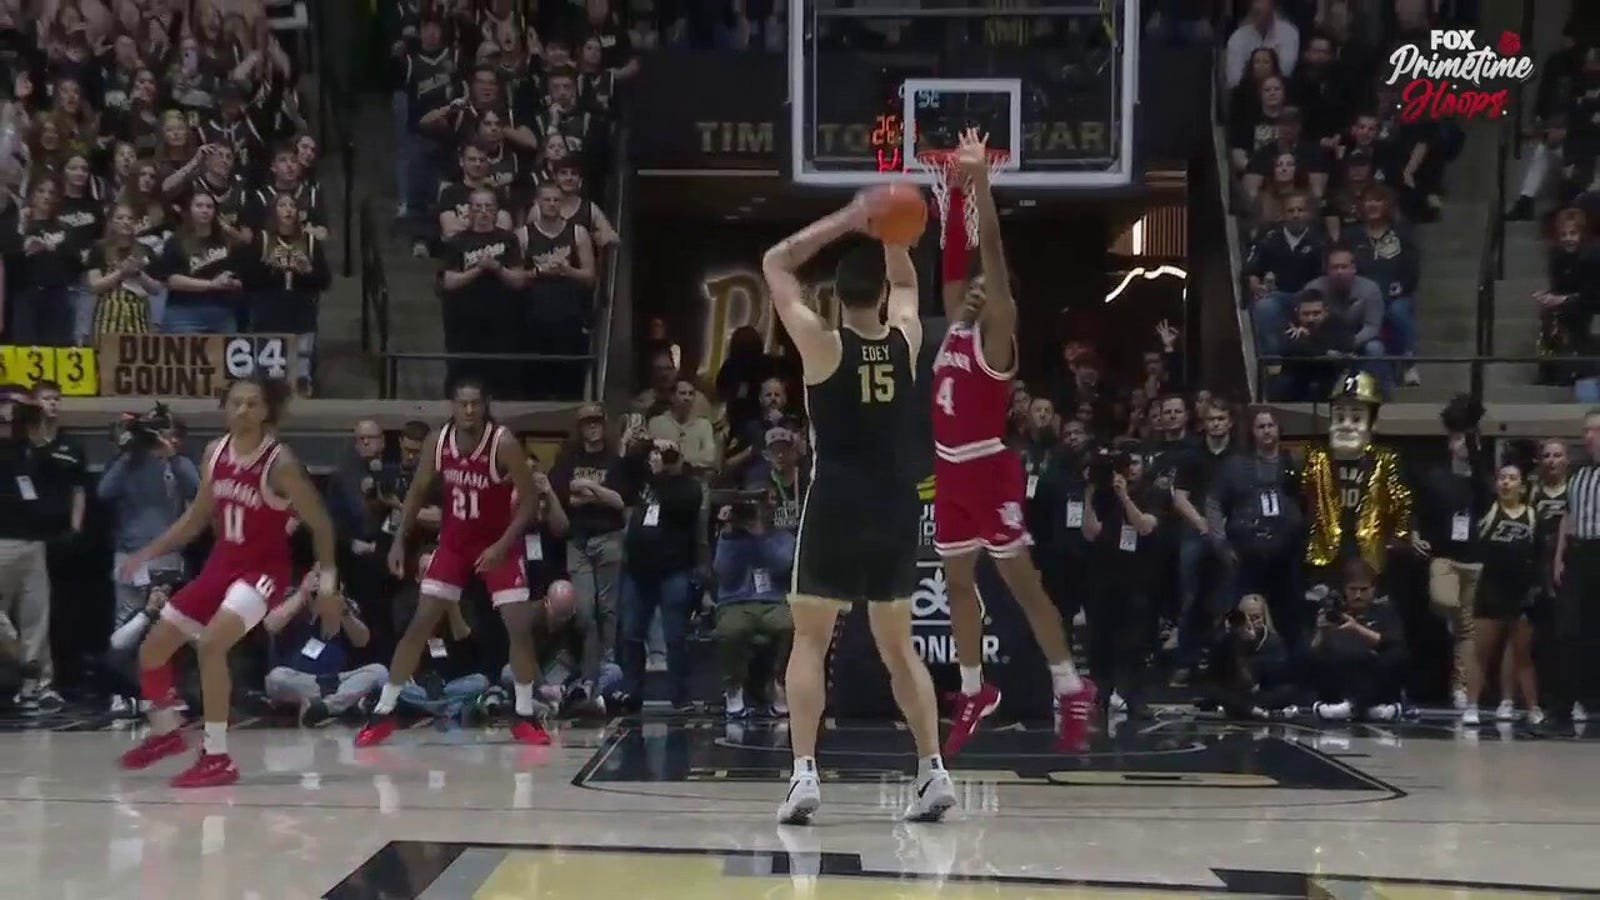 Purdue's Zack Eddy shows off his range and knocks down his first collegiate 3-pointer vs. Indiana